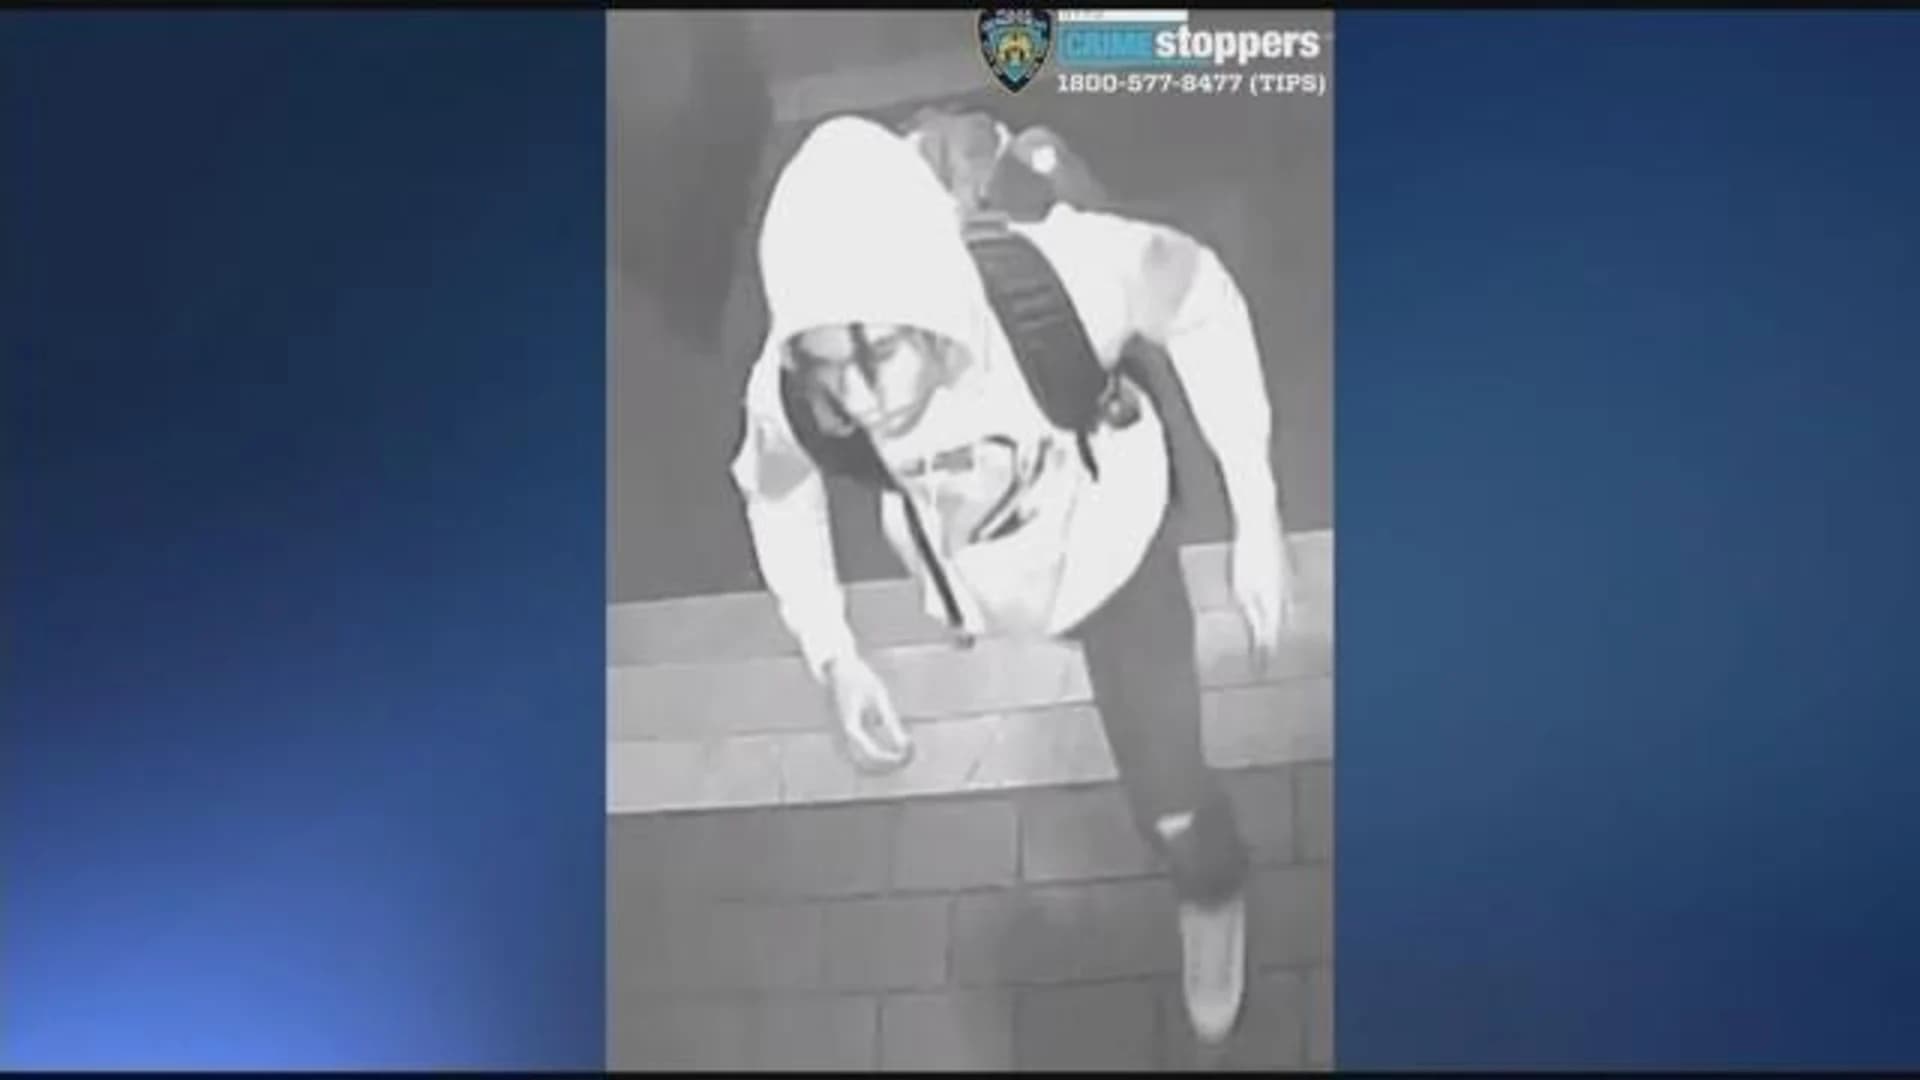 Police: Man wanted in connection to knifepoint robbery in Kingsbridge